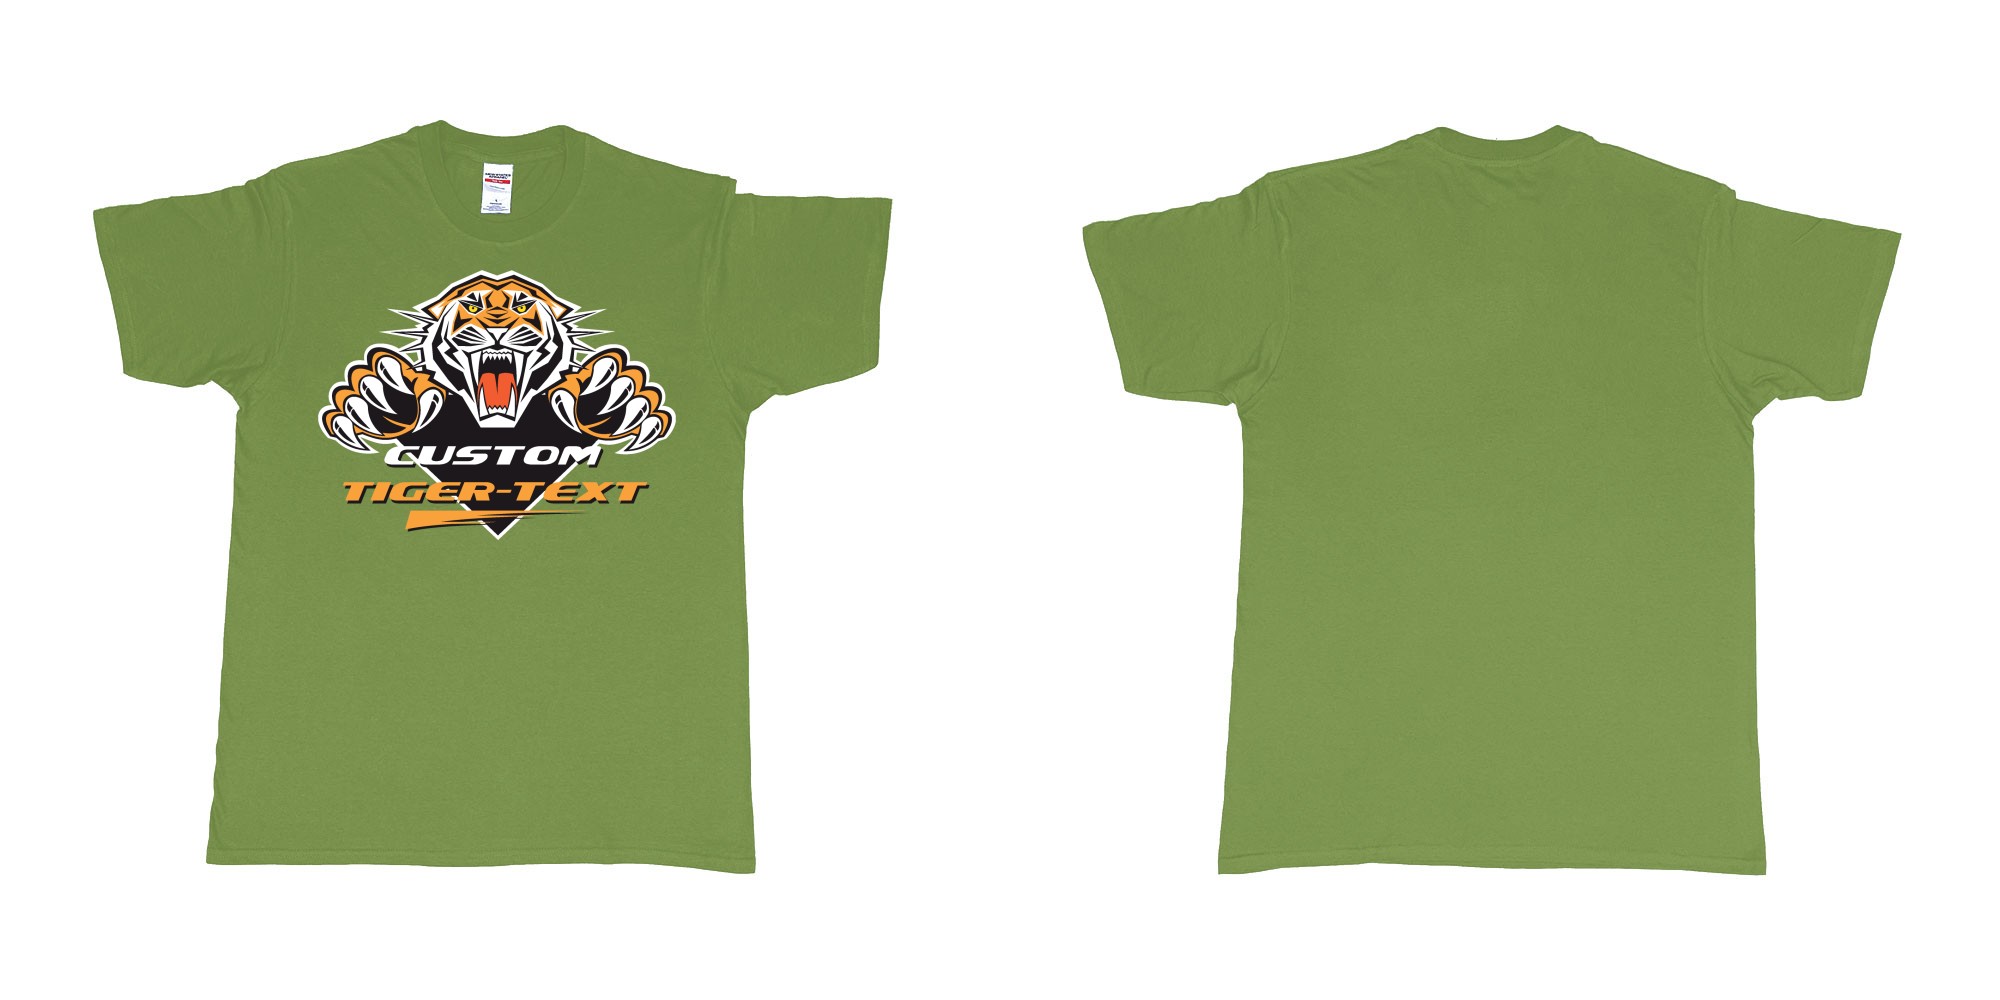 Custom tshirt design the wests tigers sydney national rugby league custom tshirt print in fabric color military-green choice your own text made in Bali by The Pirate Way